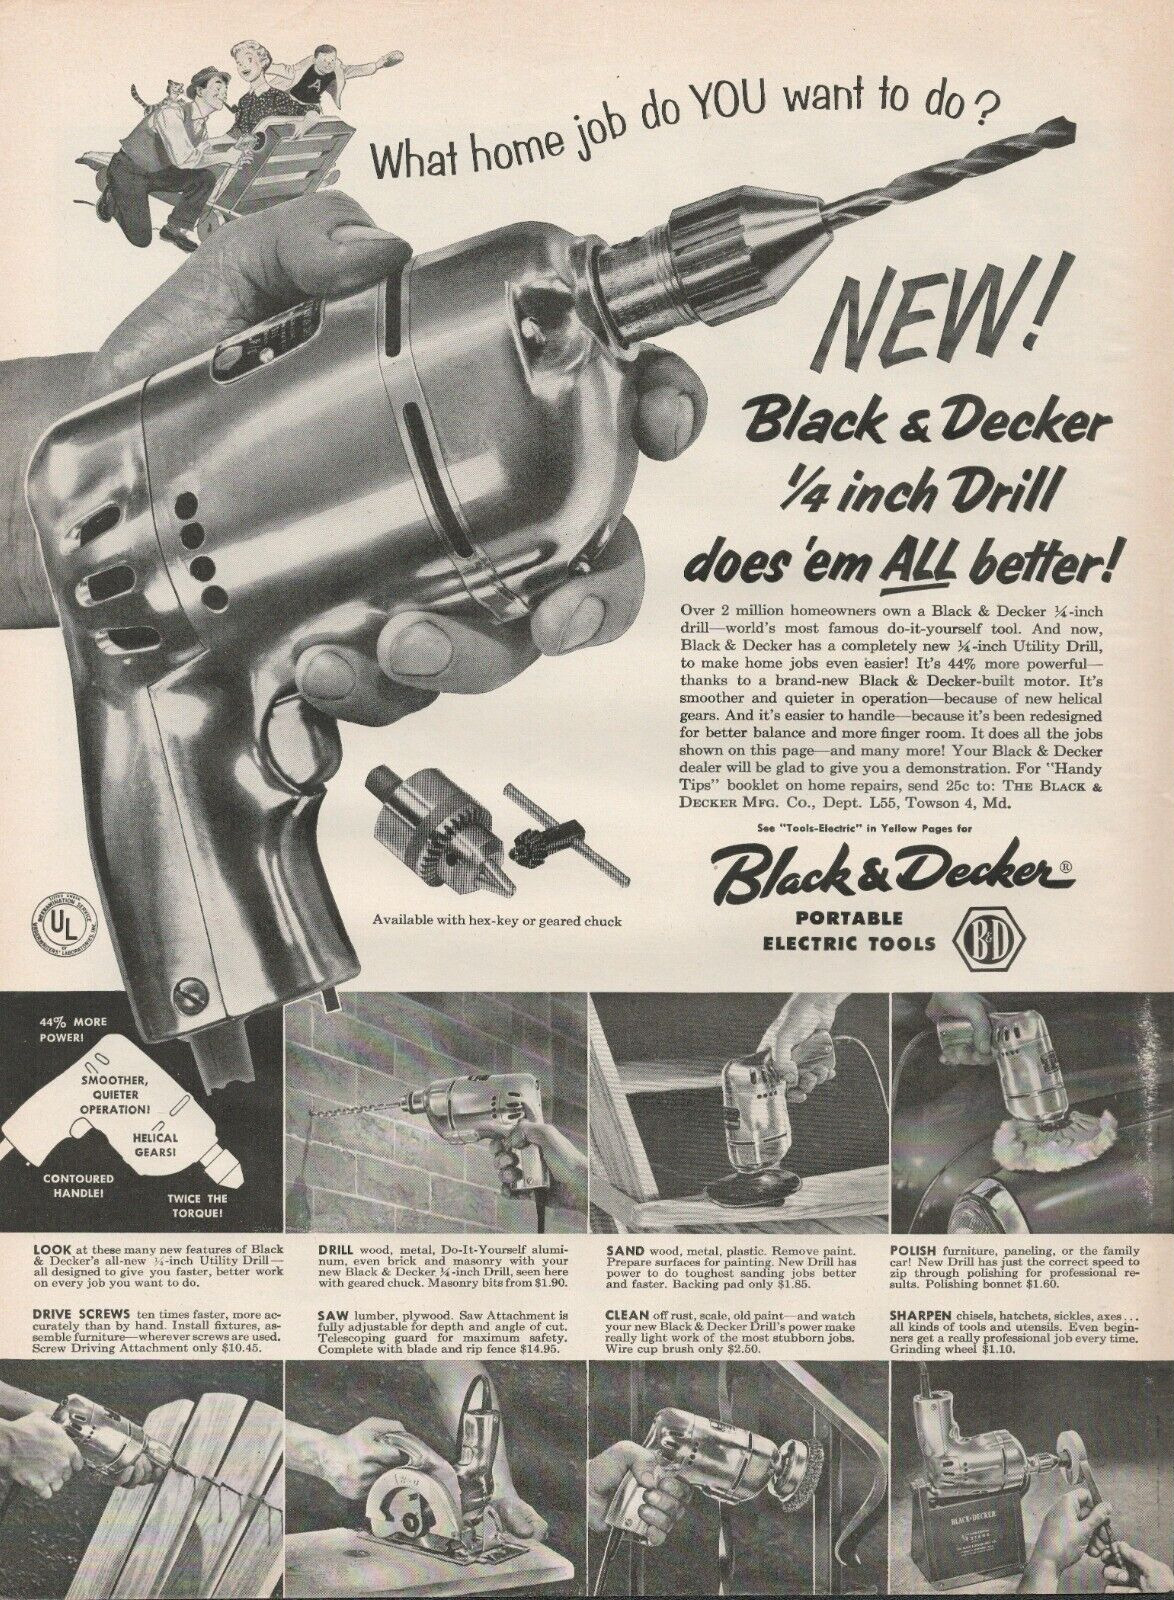 1955 Black & Decker Portable 1/4 Inch Drill Home Job You Want To Do Print Ad